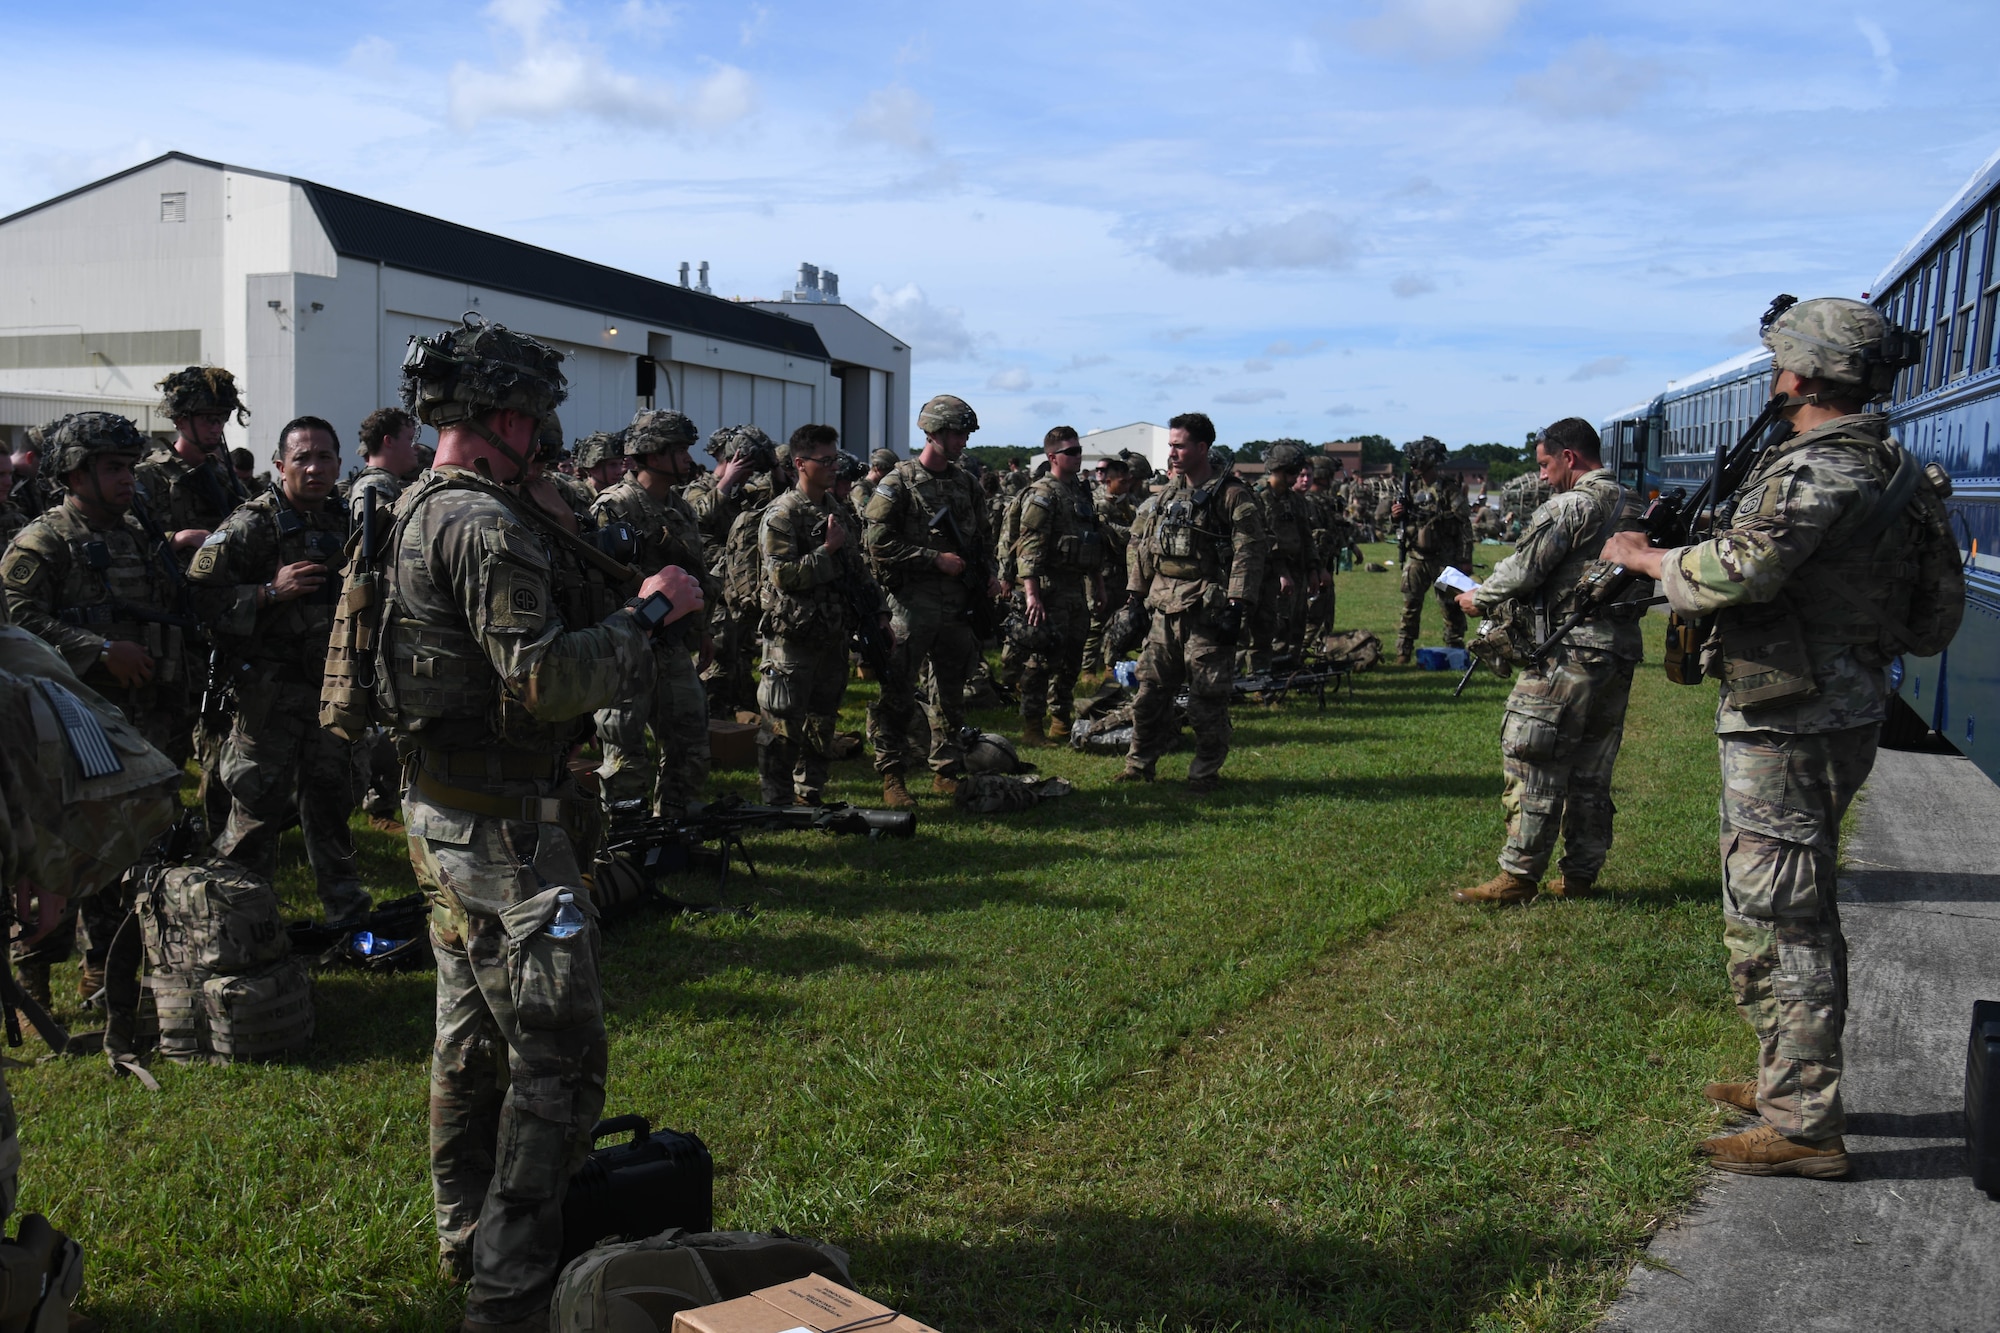 U.S. Army Soldiers assigned to the 82nd Airborne Division, Pope Army Airfield, N.C., receive a brief before loading onto a bus headed to board a C-17 Globemaster III at Joint Base Charleston, S.C.